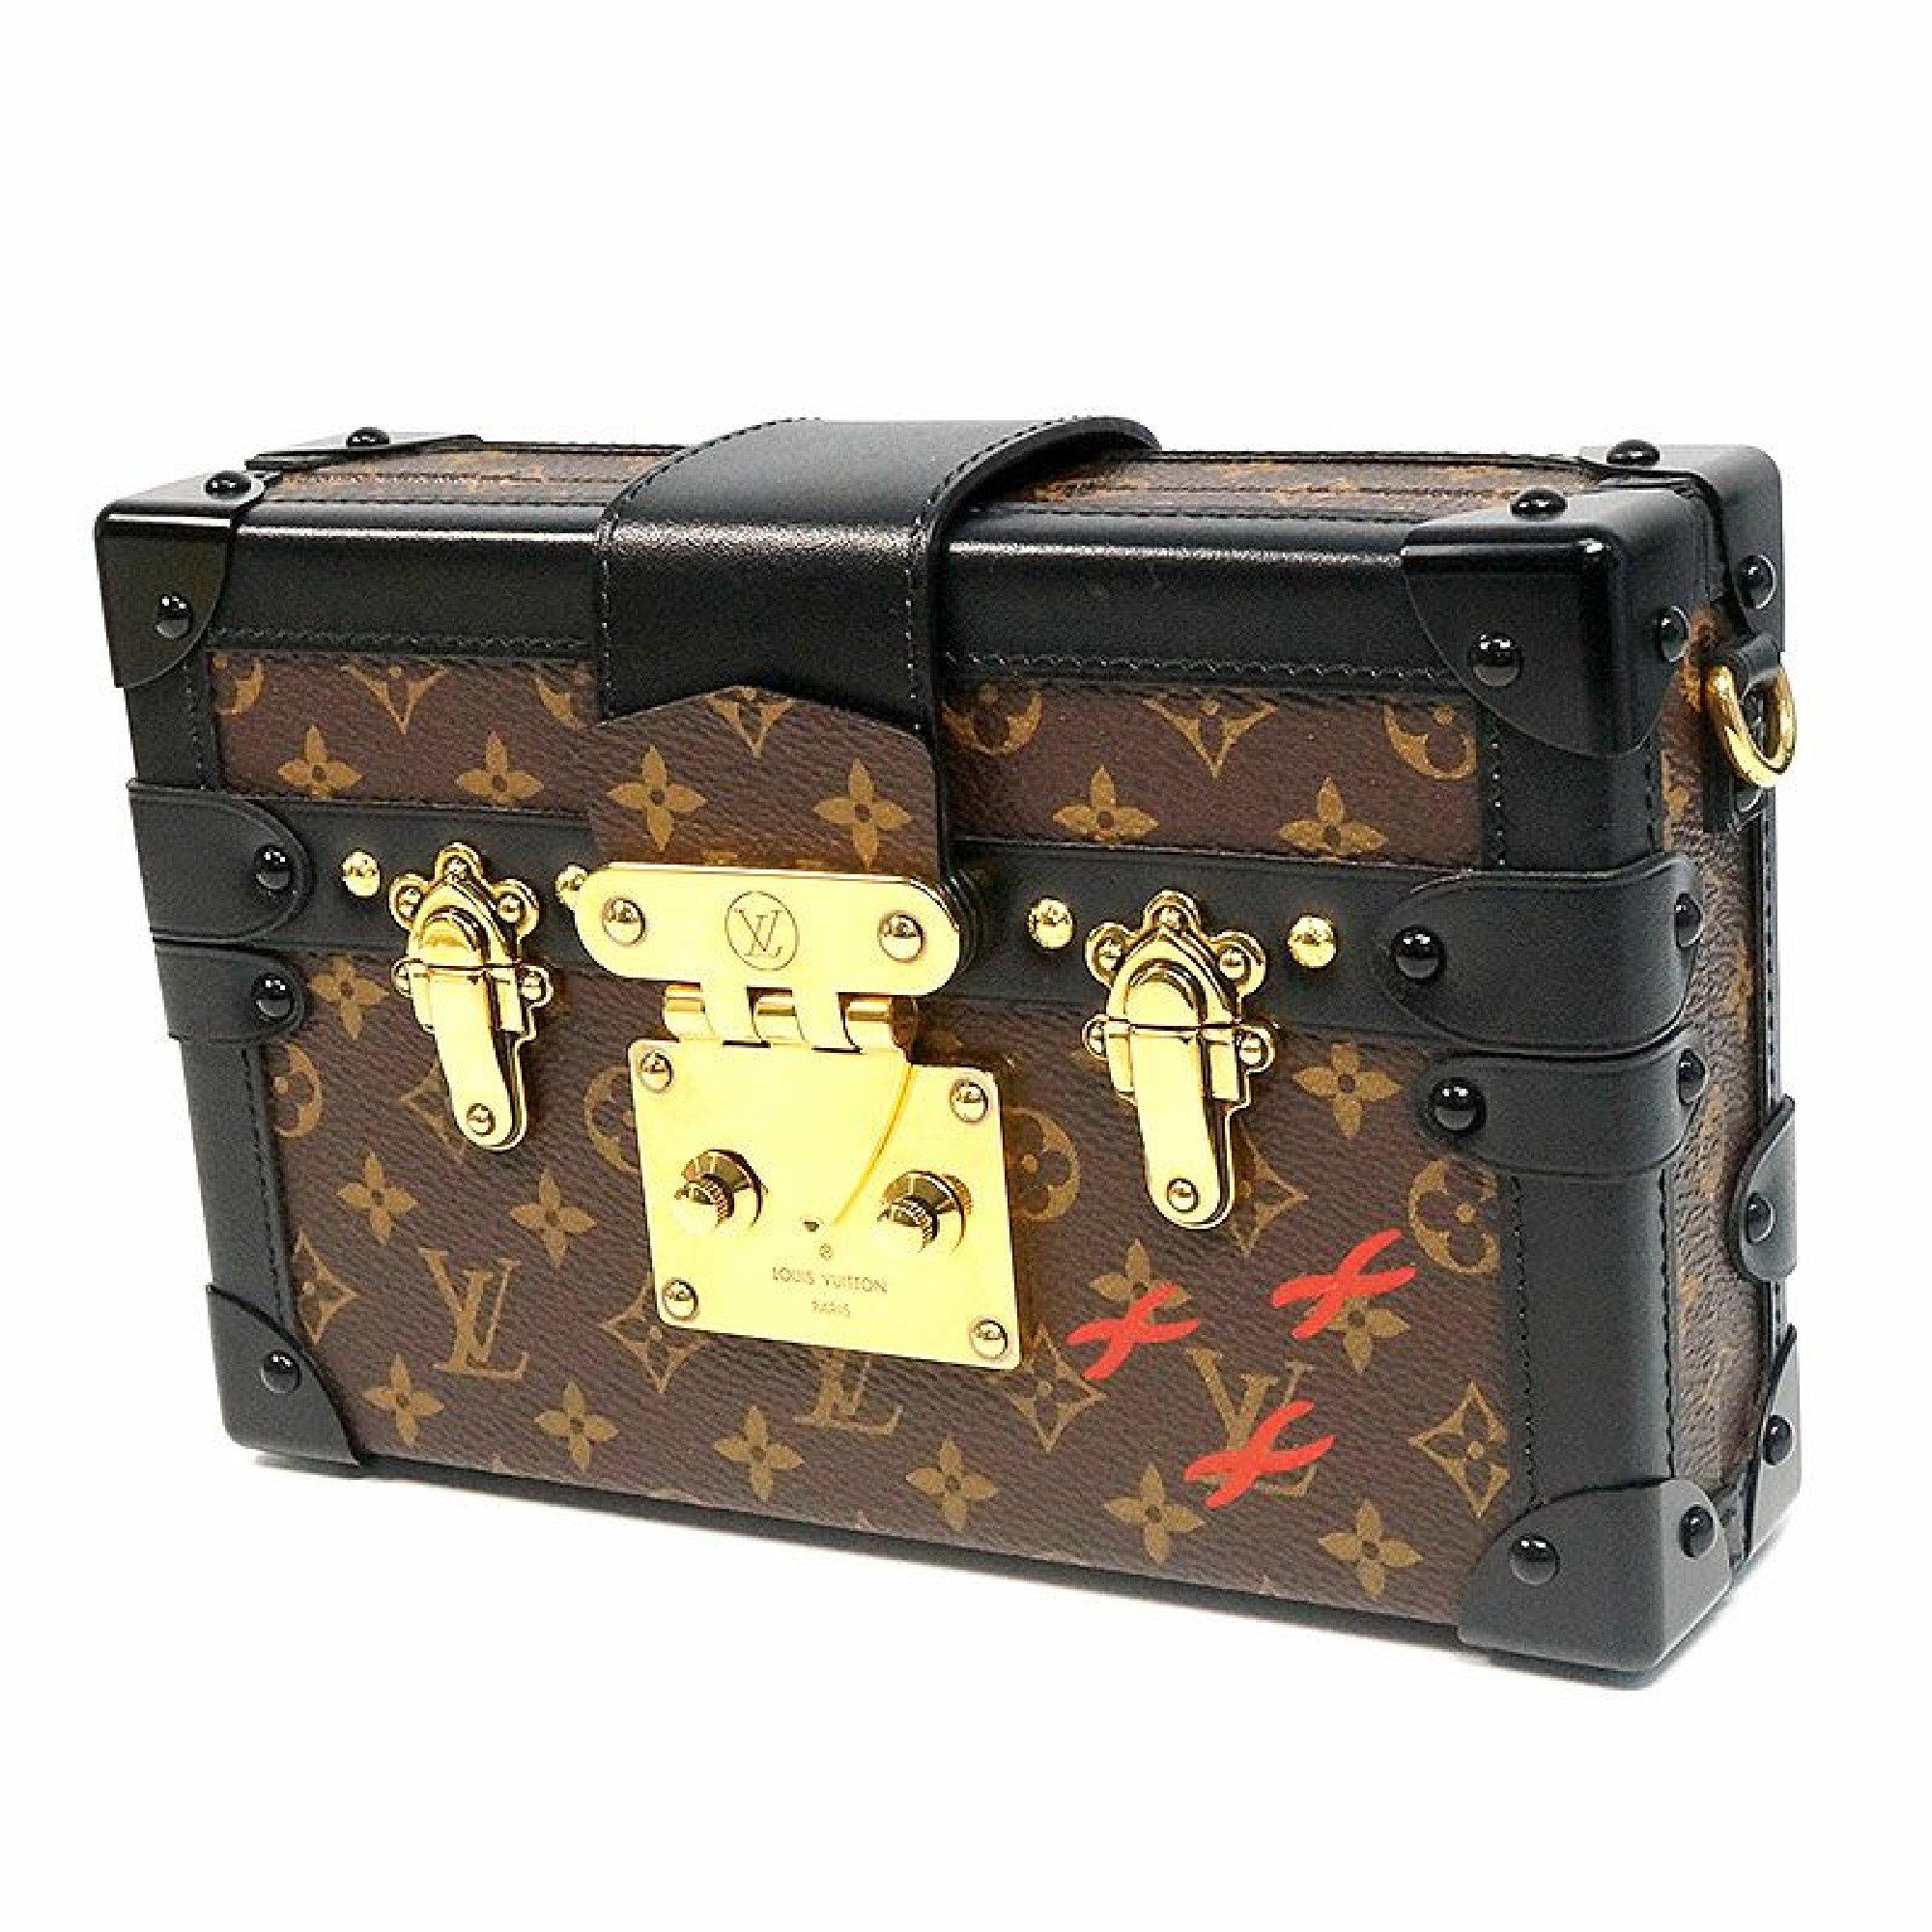 An authentic LOUIS VUITTON Petite Malle Mini trunk Womens shoulder bag M44199 The outside material is Monogram canvas. The pattern is Petite Malle  Mini trunk. This item is Contemporary. The year of manufacture would be 2015.
Rank
AB signs of wear